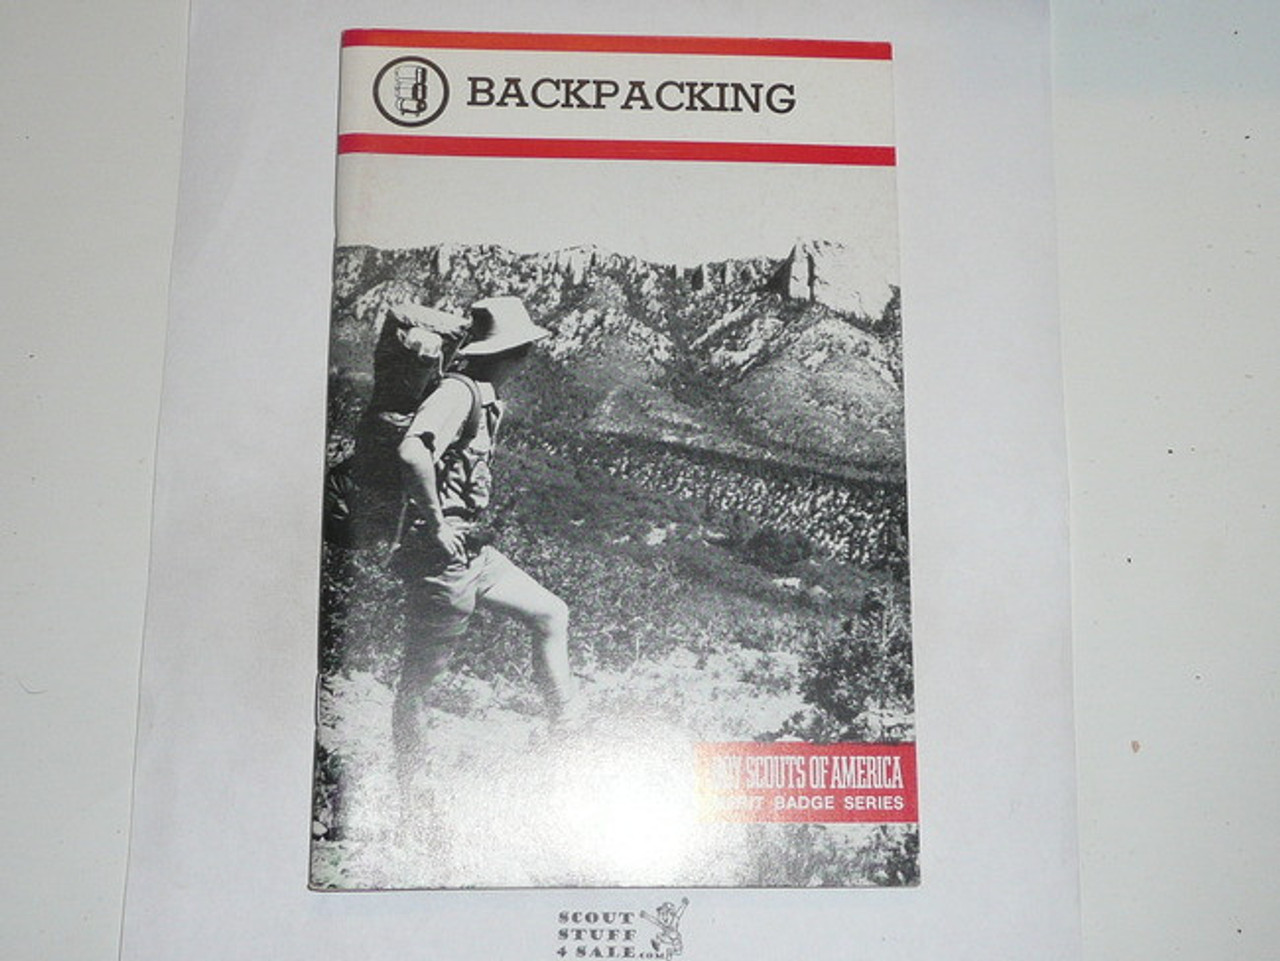 Backpacking Merit Badge Pamphlet, Type 9, Red Band Cover, 1-89 Printing